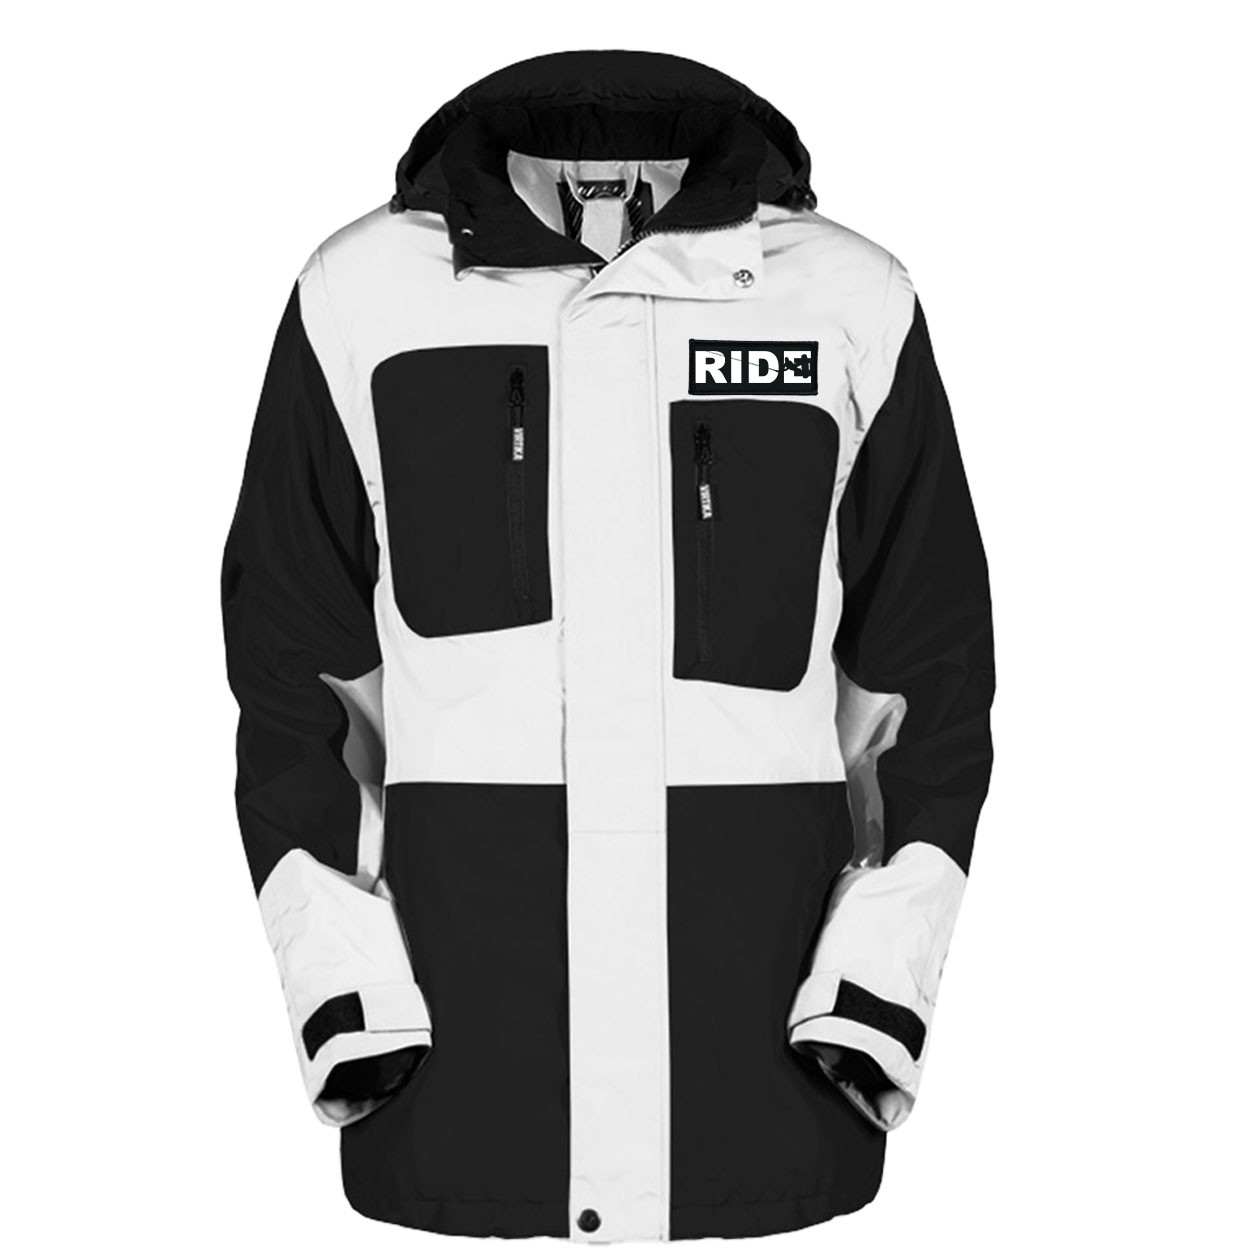 Ride Wakeboard Logo Classic Woven Patch Pro Snowboard Jacket (Black/White)